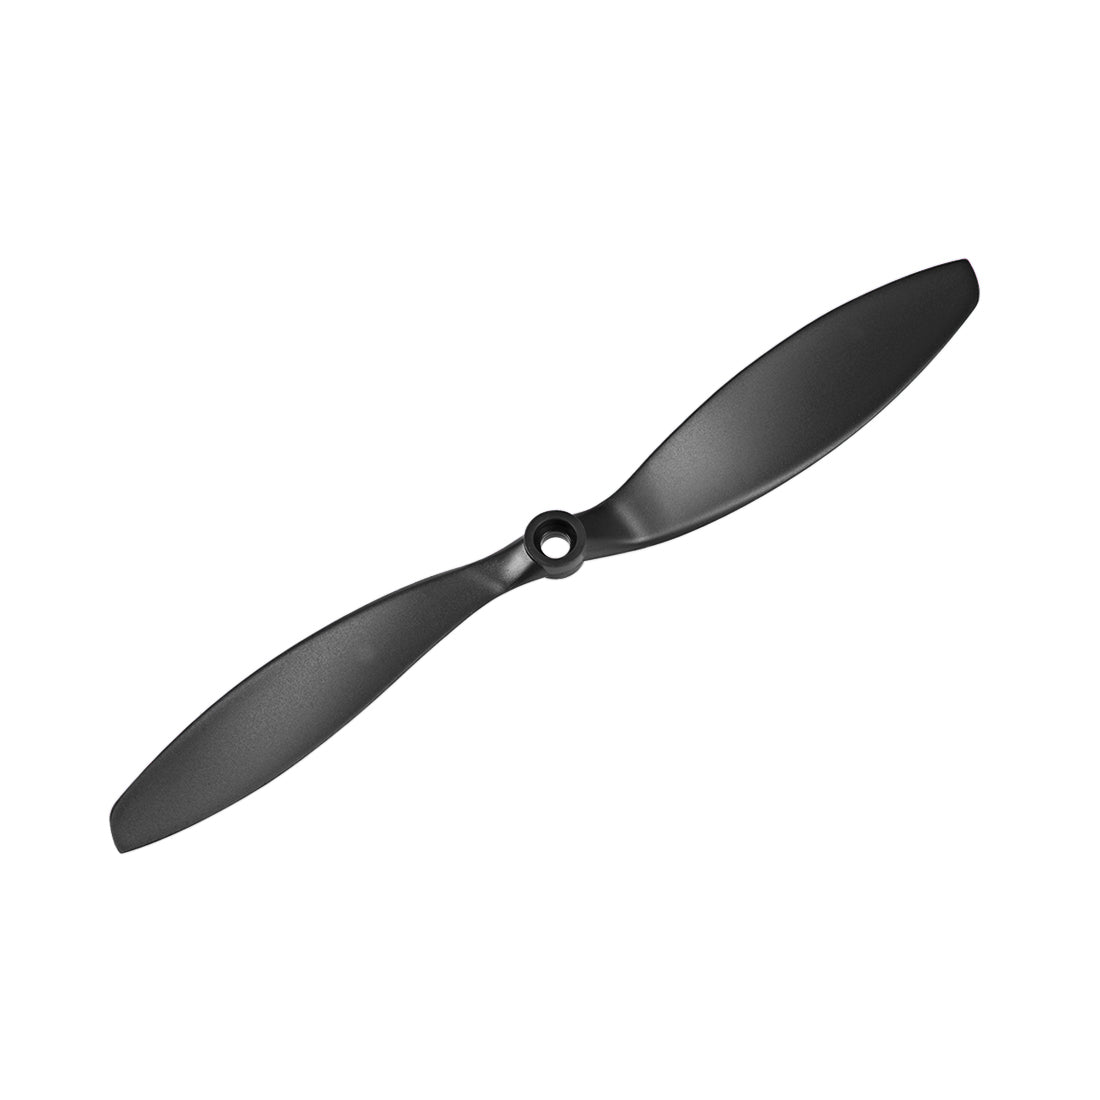 uxcell Uxcell RC Propellers CW CCW 9047 9x4.7 Inch 2-Vane Fixed-Wing for Airplane Toy, Nylon Black 2 Pair with Adapter Rings